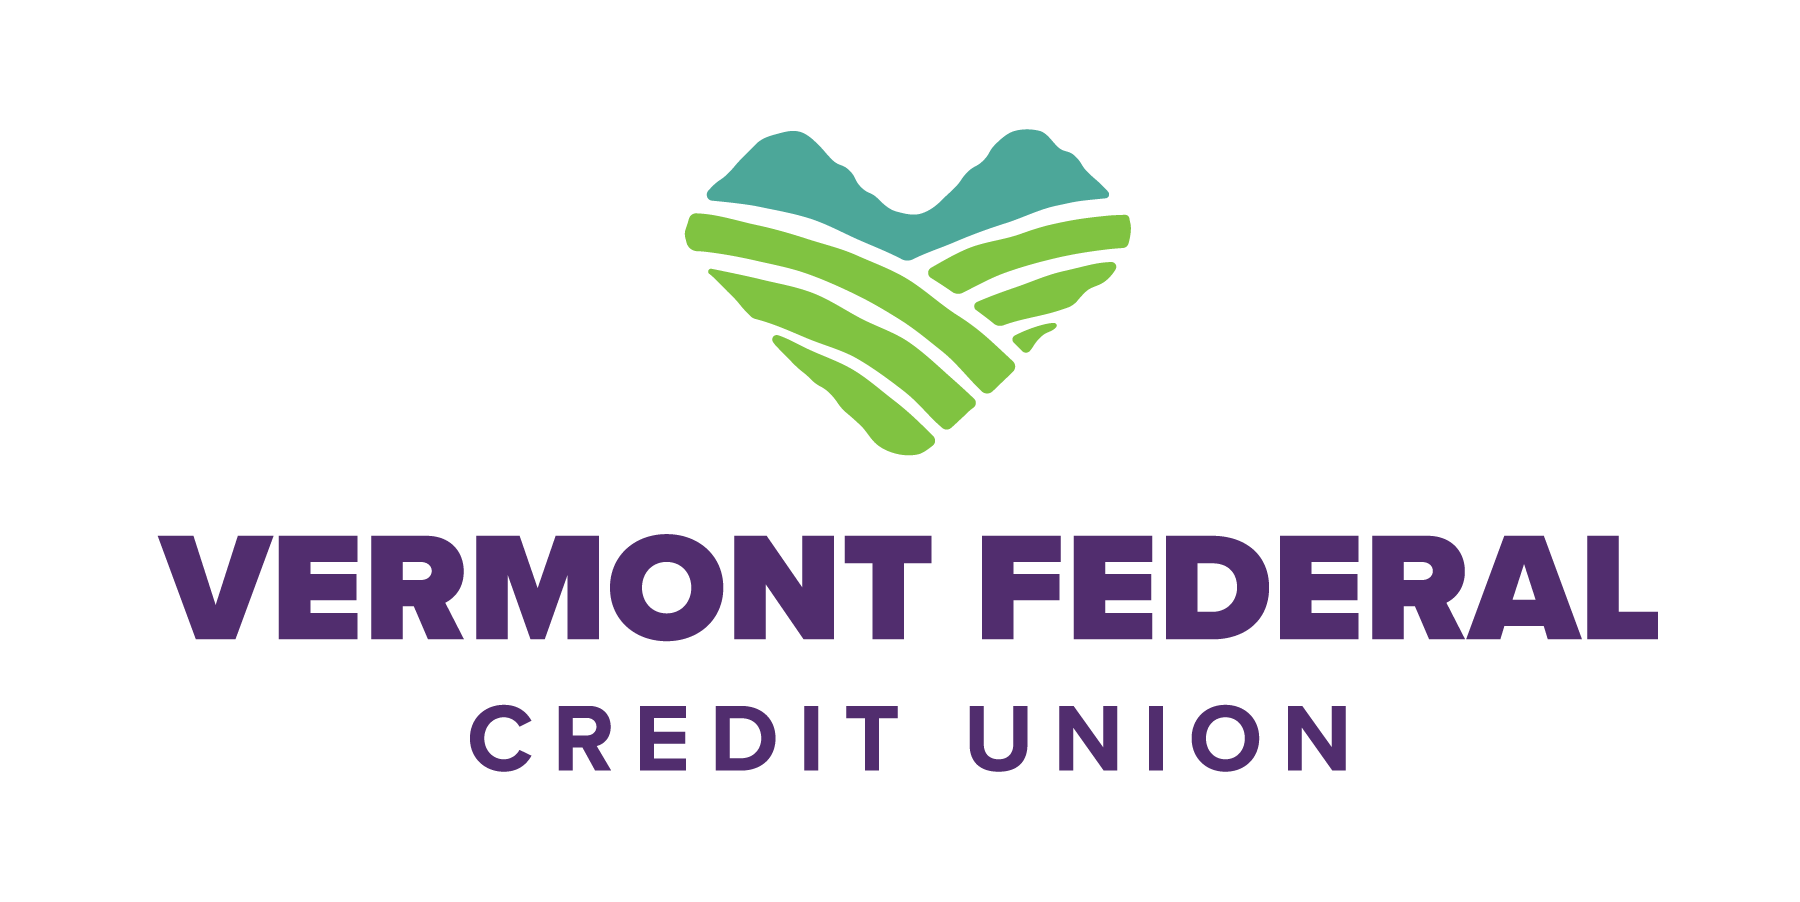 Vermont Federal Credit Union Increases Review Volume by 160% and Decreases Negative Reviews by 93% in 120 days with Invite